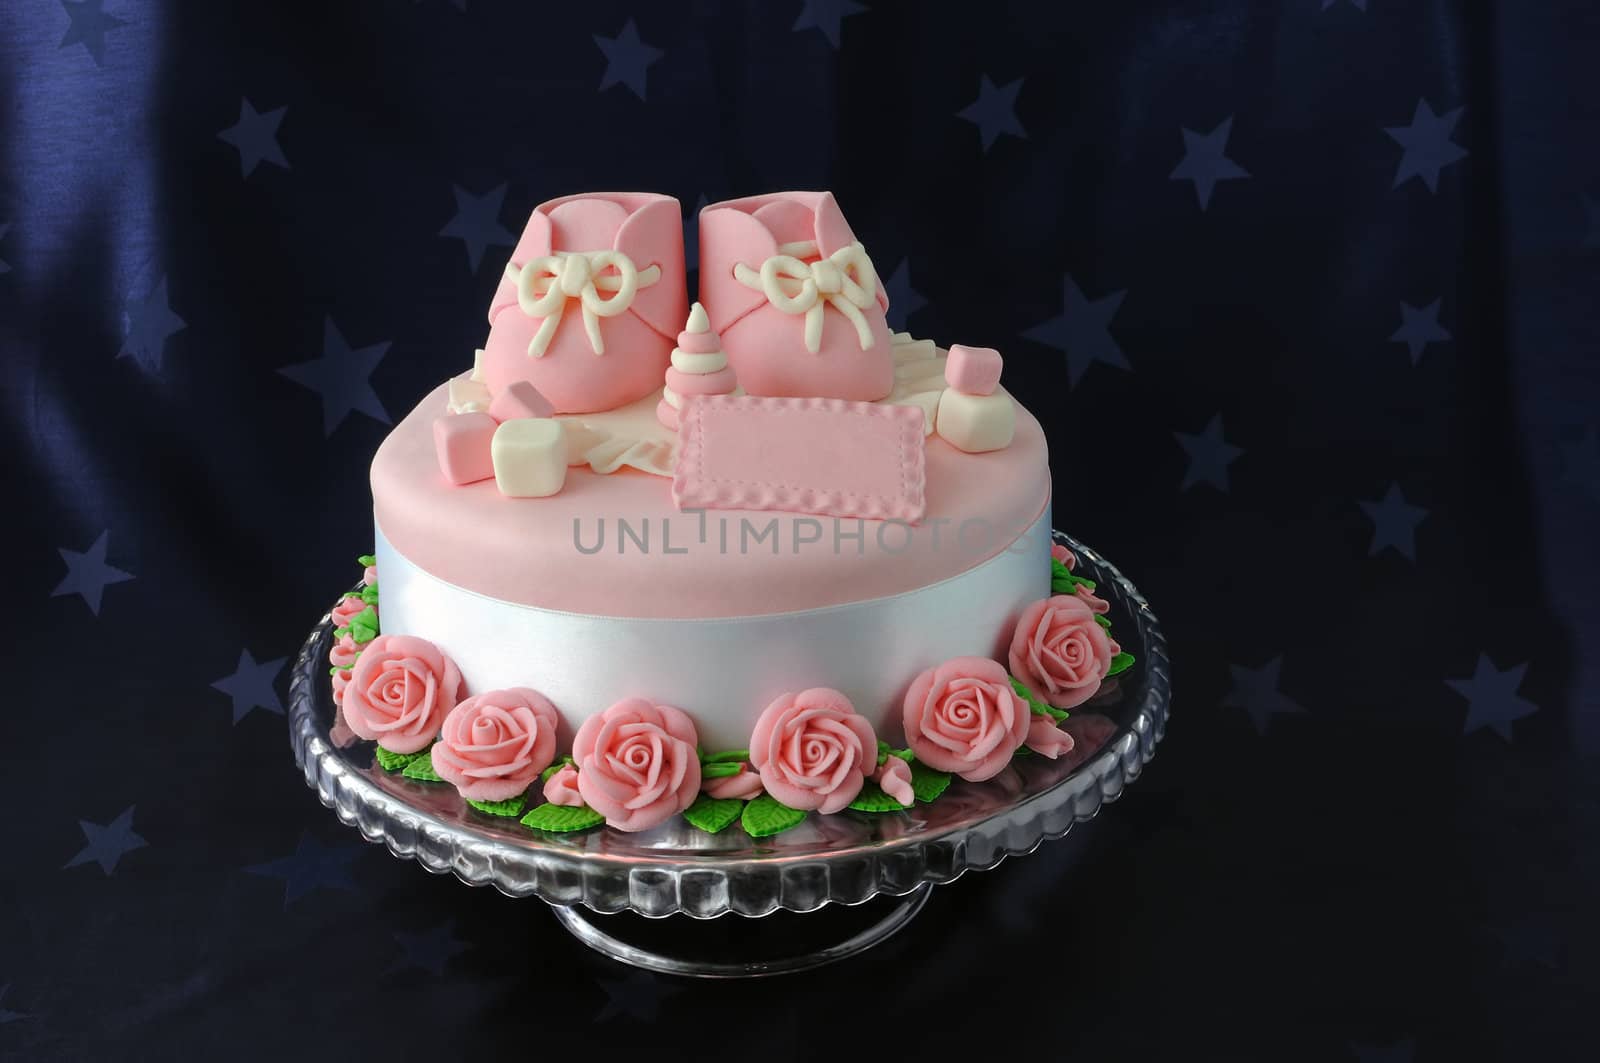 Cake with booties and toys made of marzipan